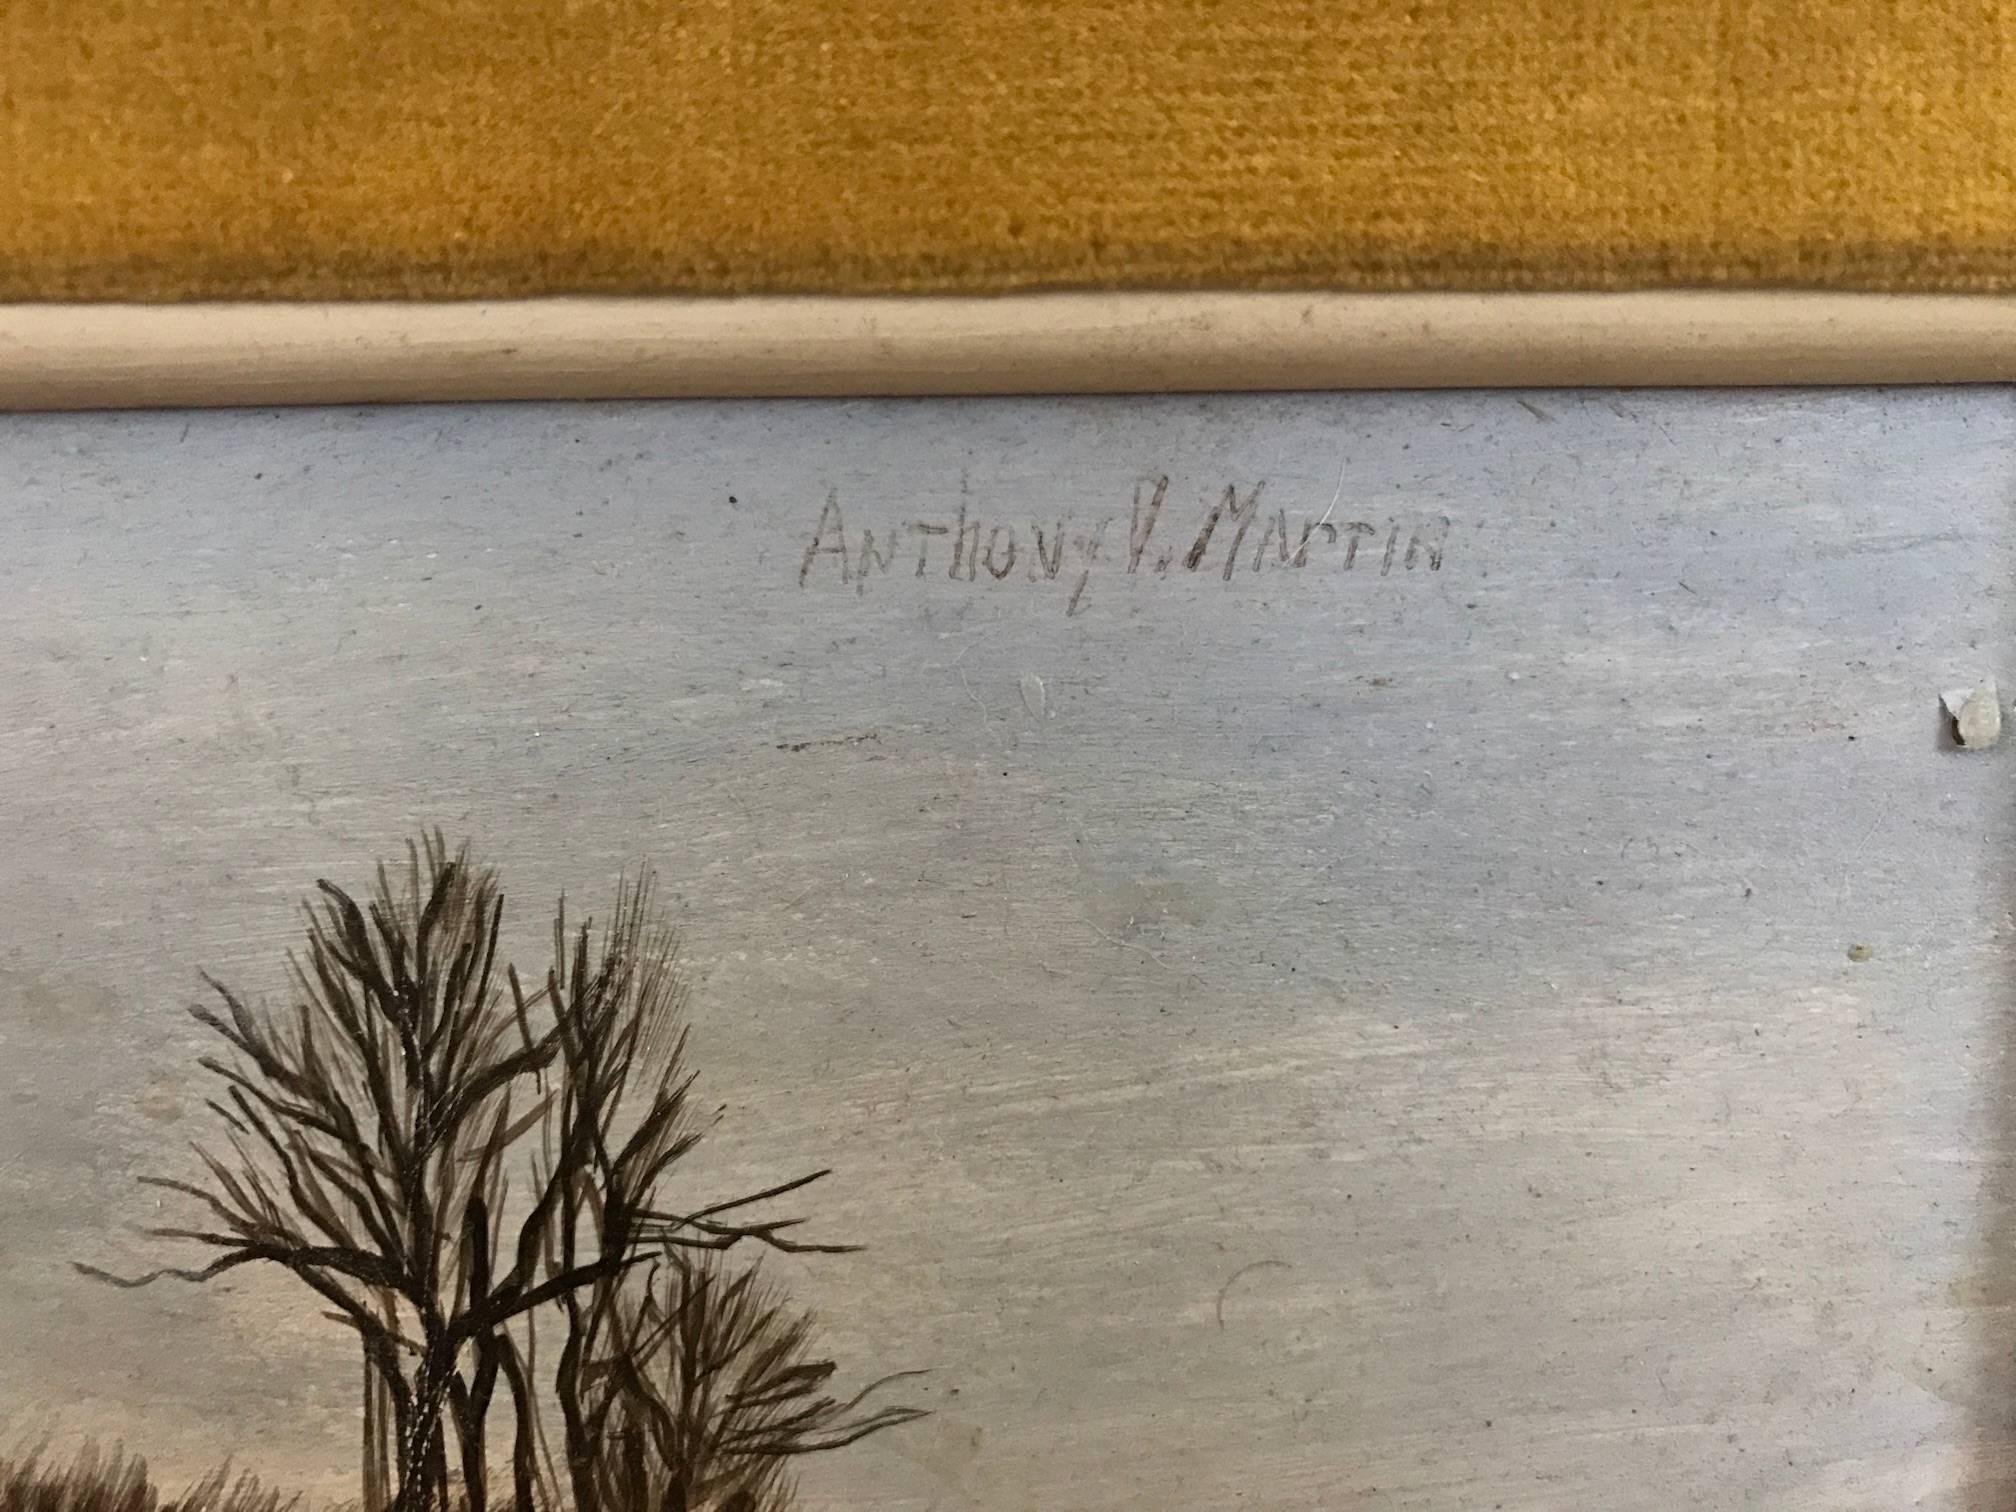 Anthony Martin Tree Stump landscape painting in egg tempera. This painting was featured in the DuBose gallery in Houston, Texas. Artist signature in top right corner. Framed in a worn wooden frame and mat. 

Artist Biography: Anthony V. Martin grew